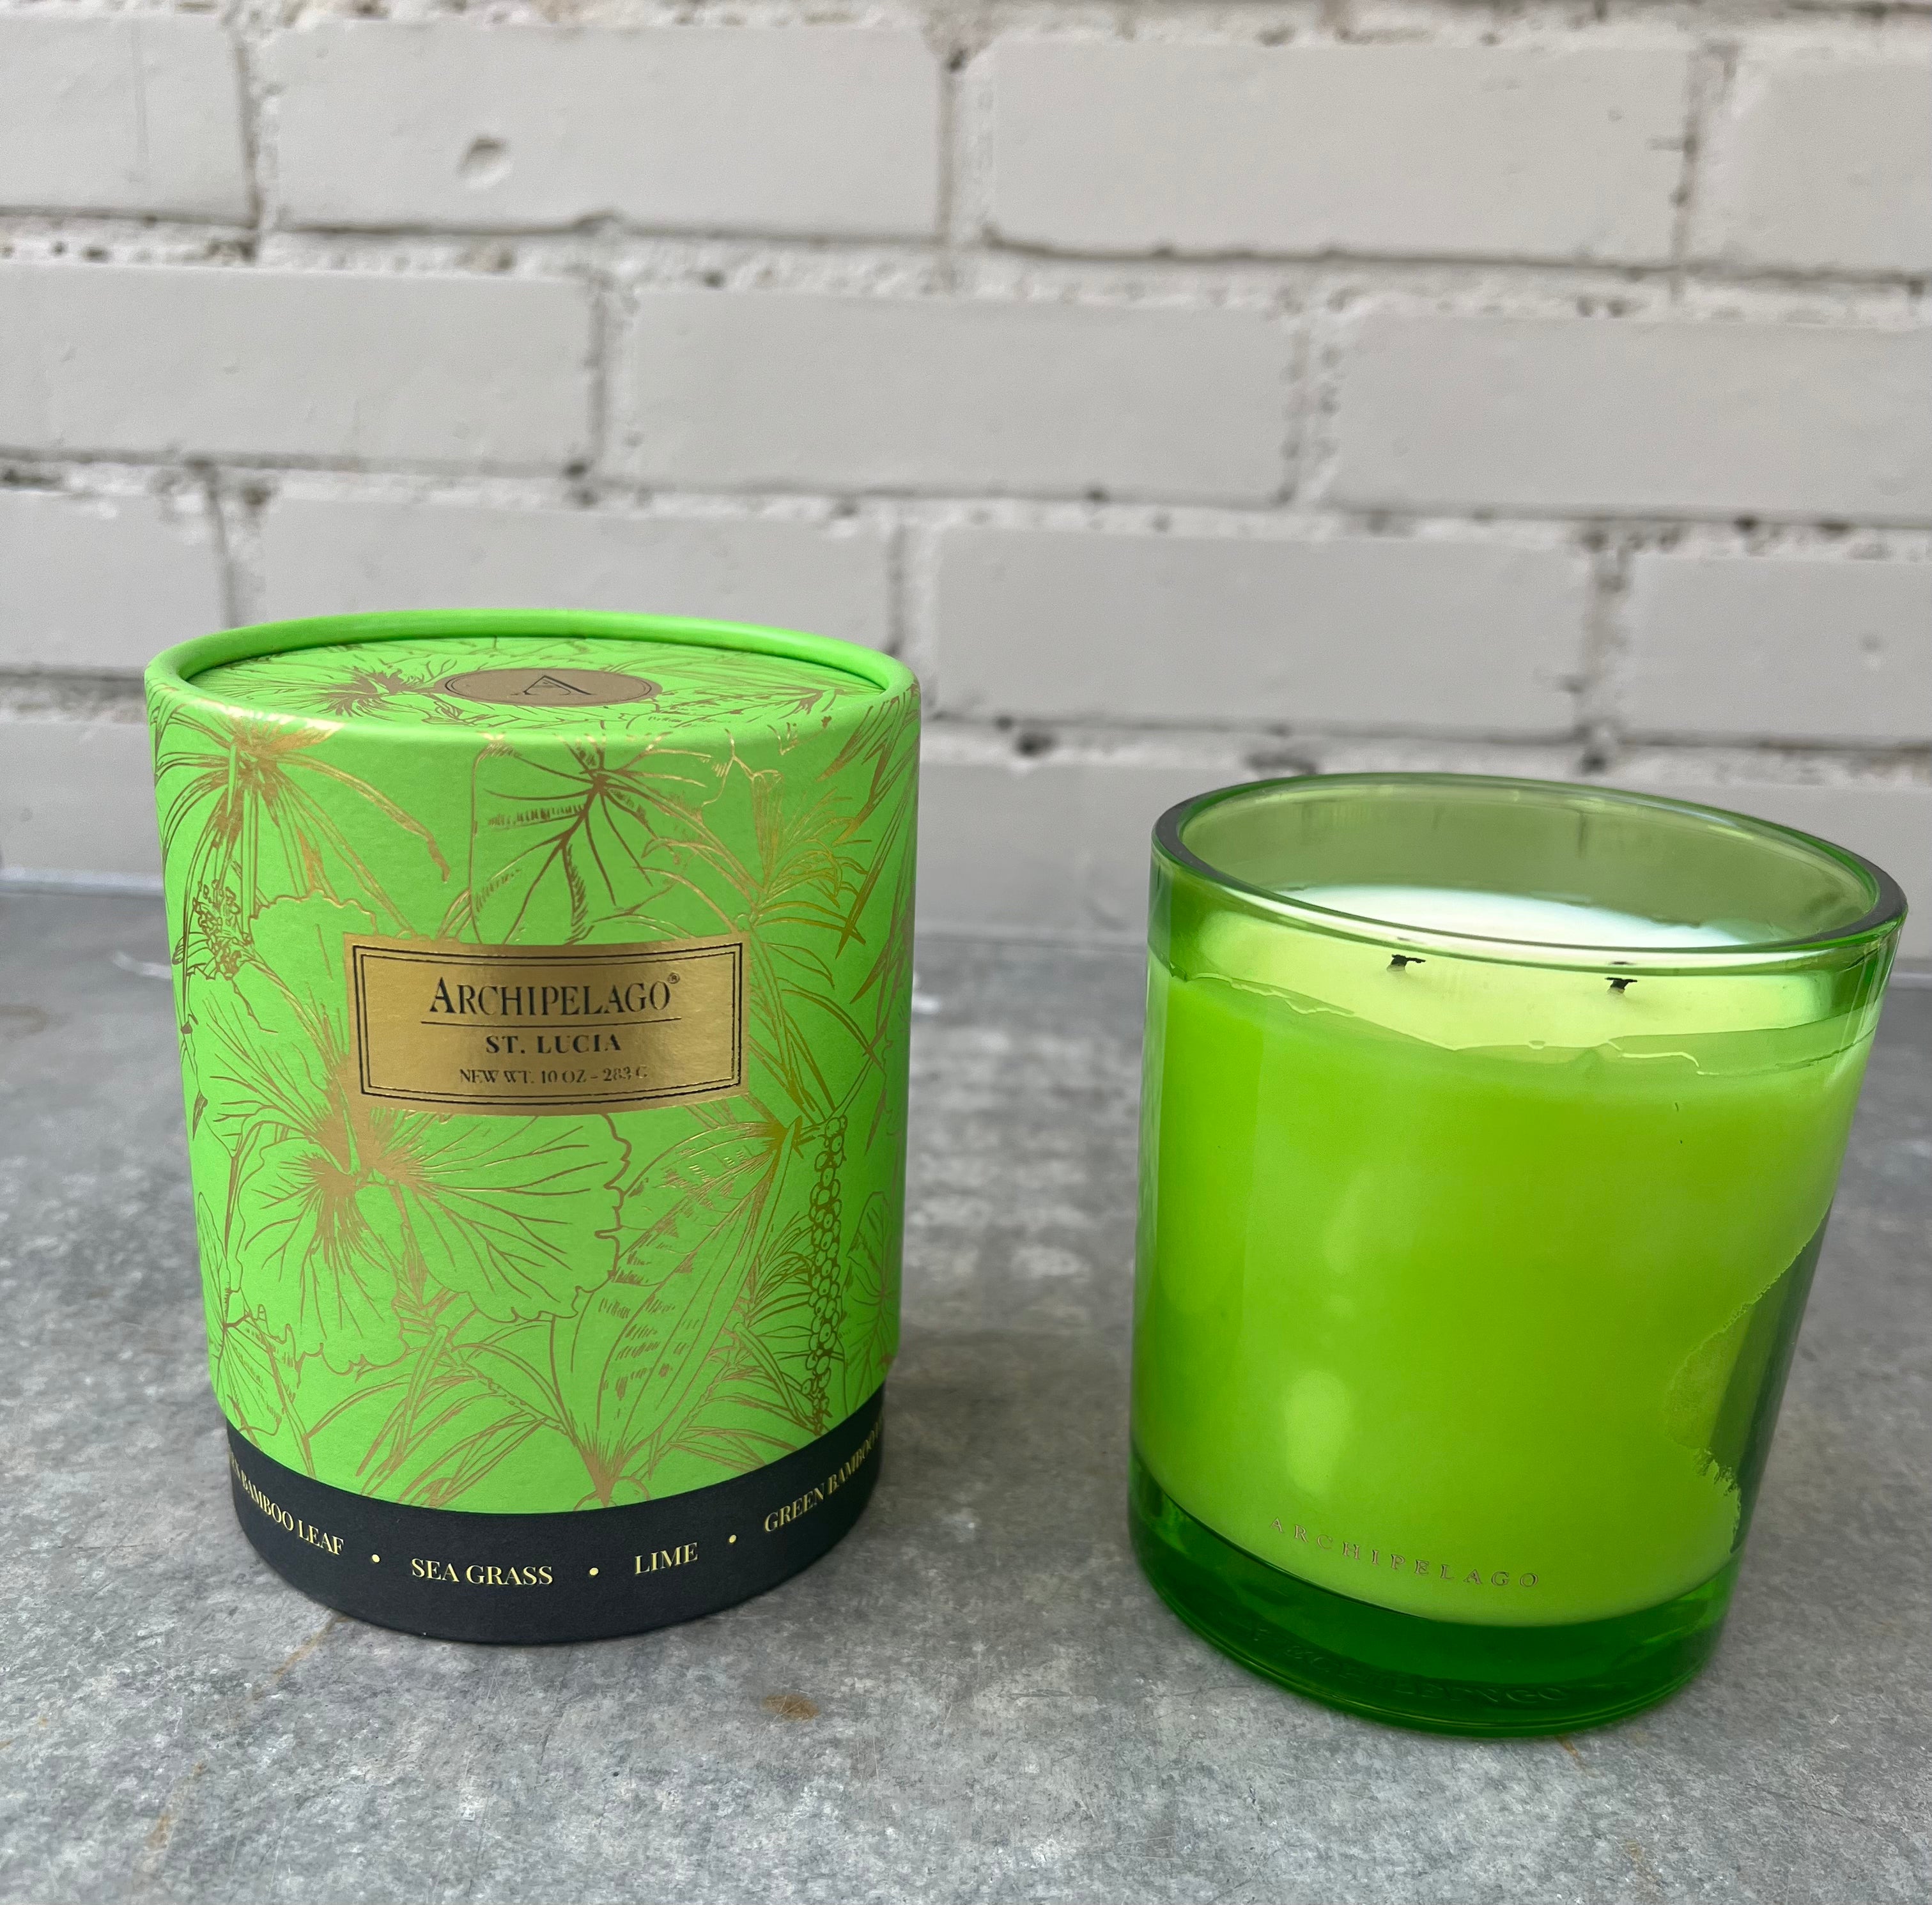 St Lucia Boxed Candle by Archipelago